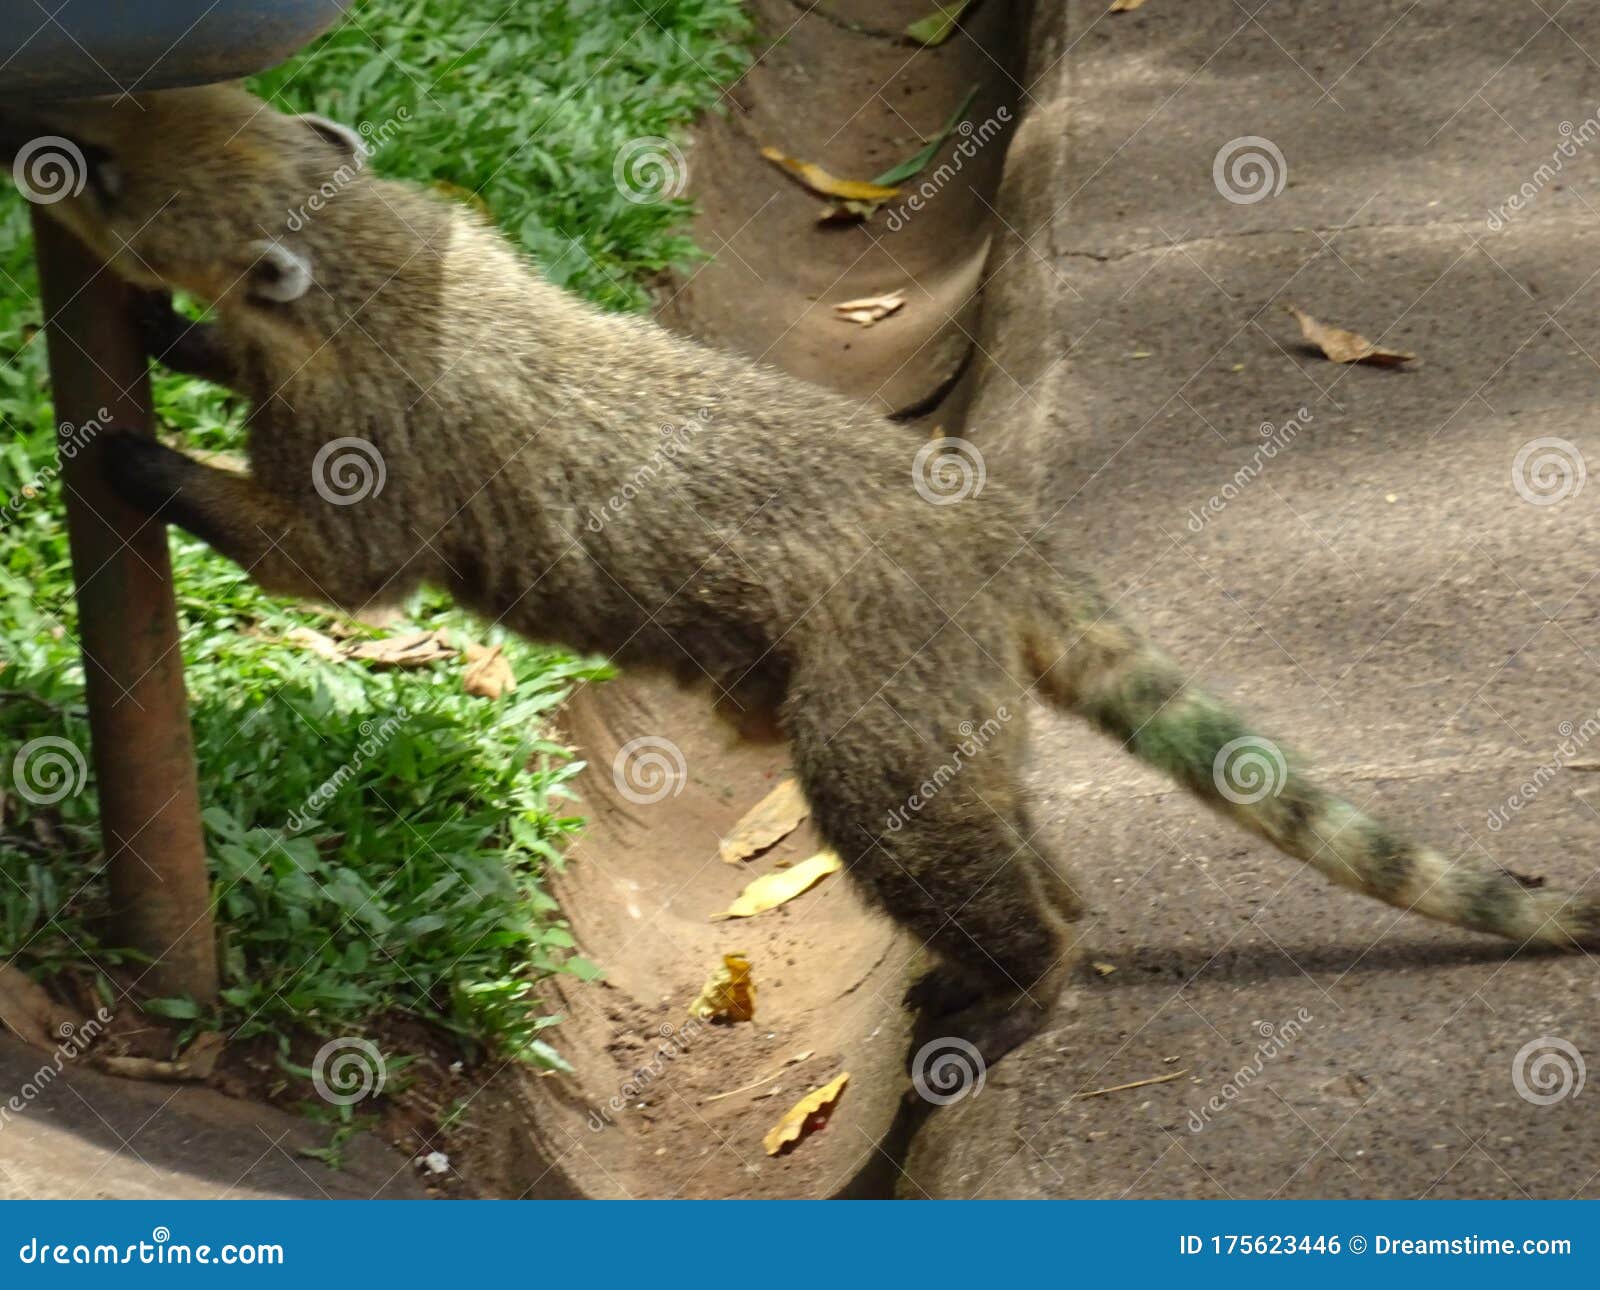 coati looking for food in a trash